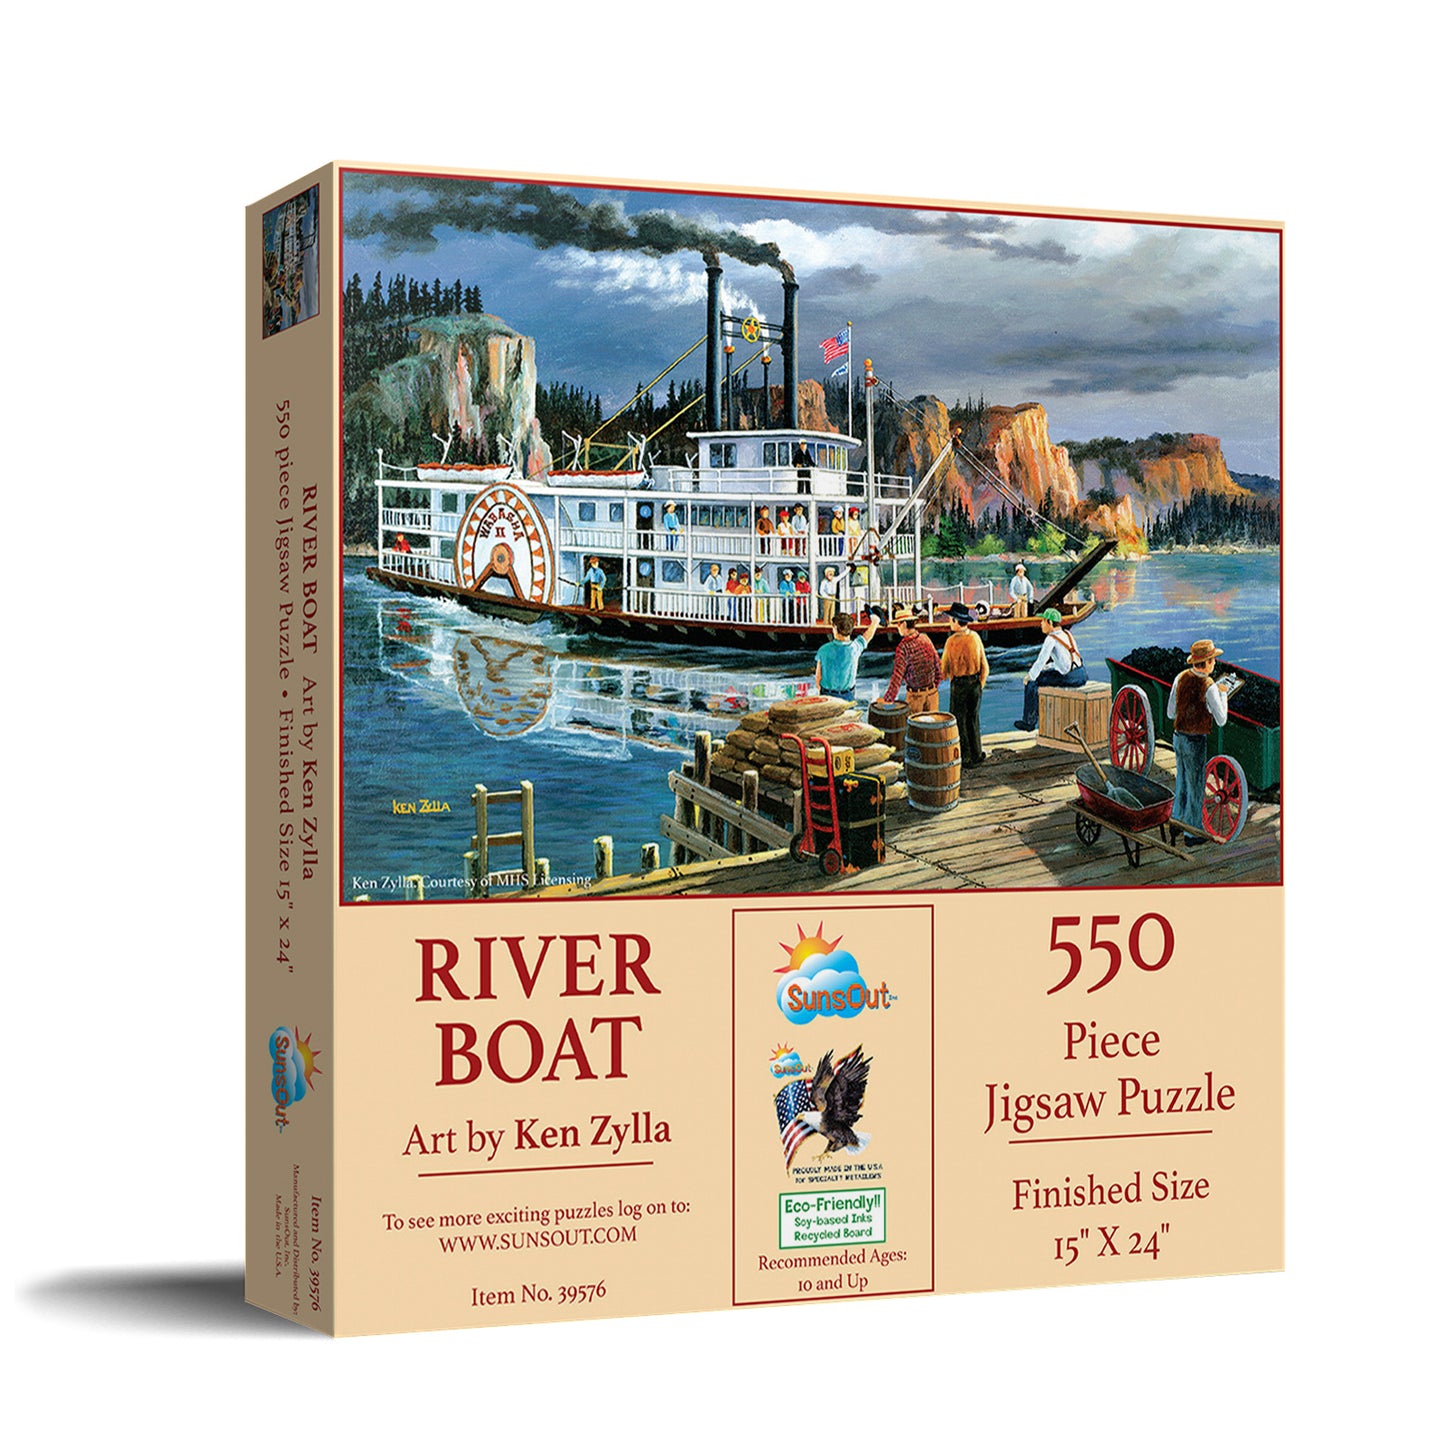 Riverboat 550 - 550 Piece Jigsaw Puzzle